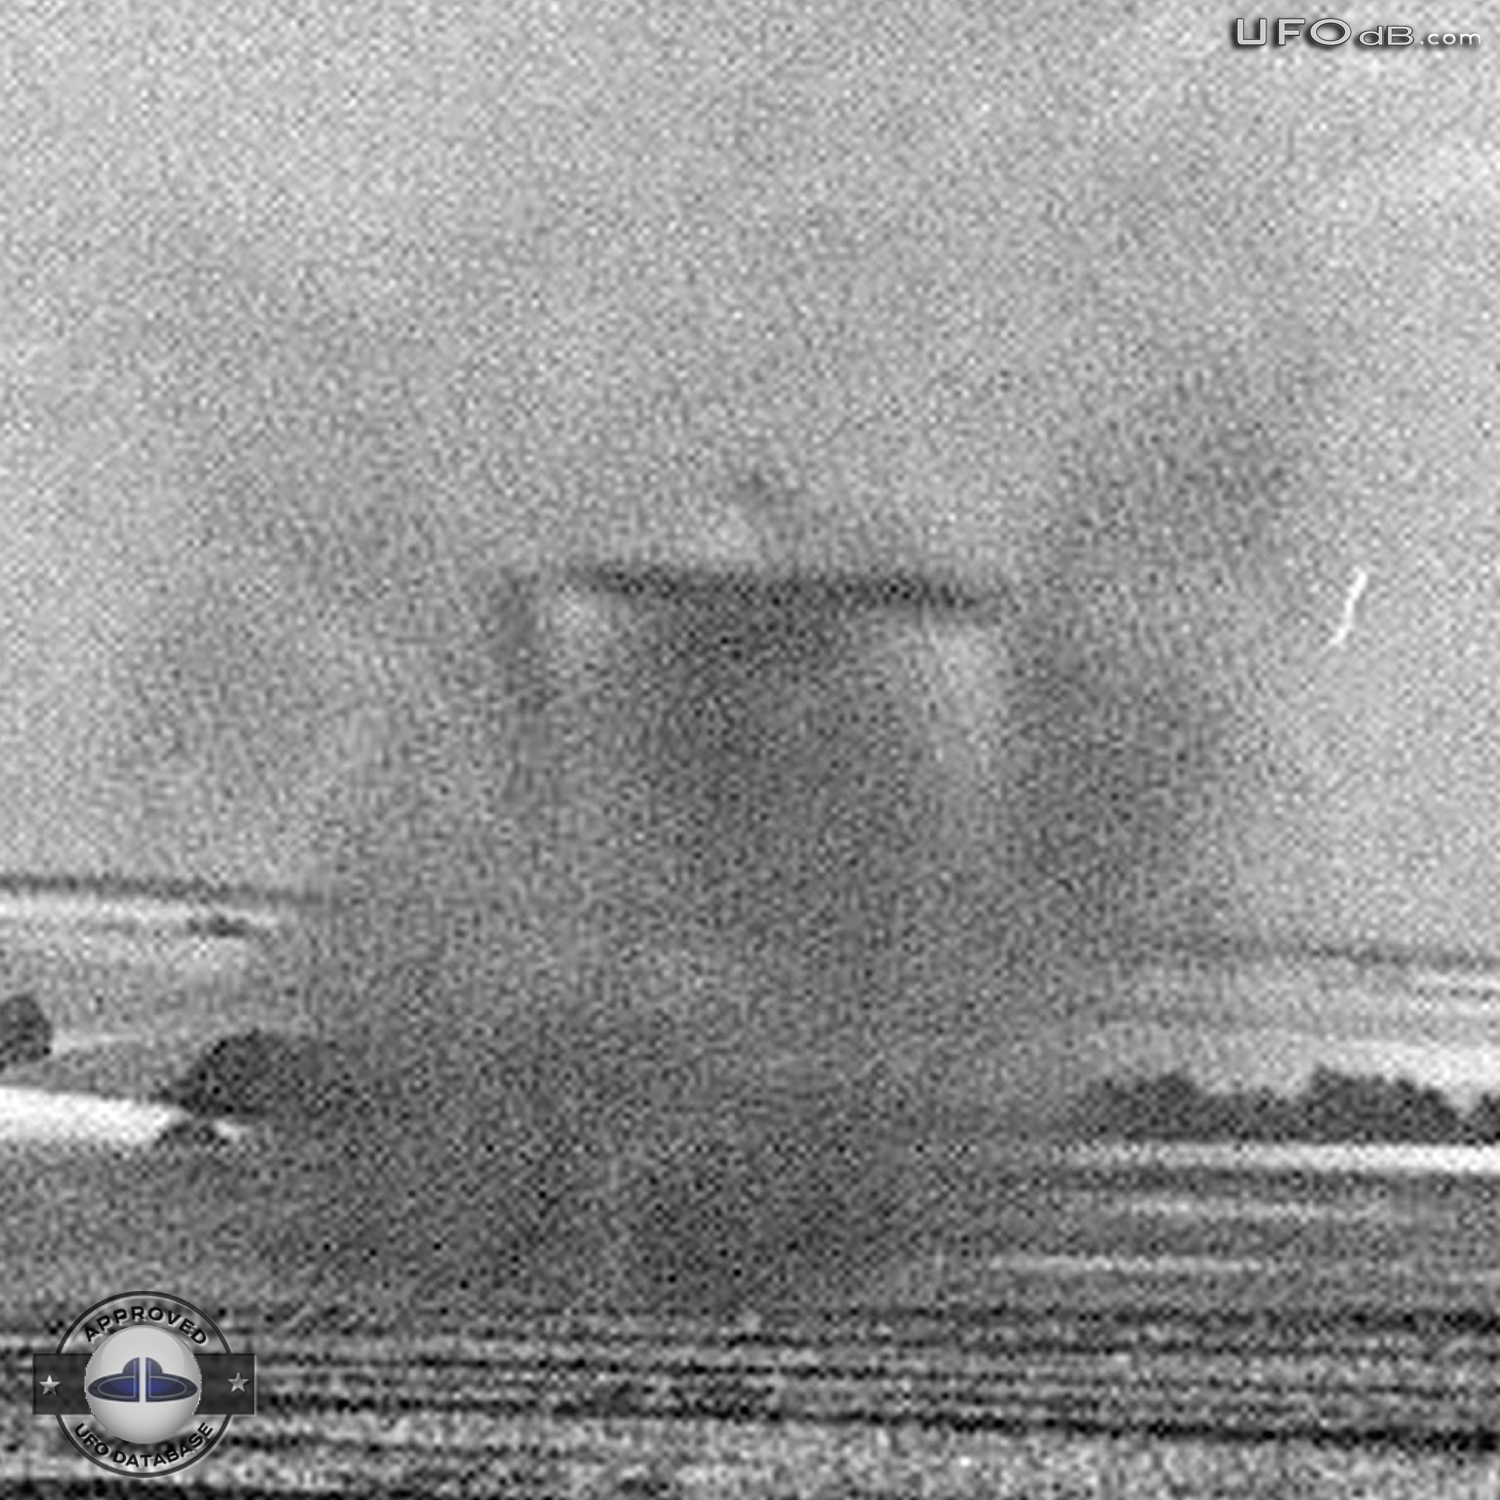 Dust Blowing UFO over the Fields of Verdun in France | March 27 1985 UFO Picture #304-3